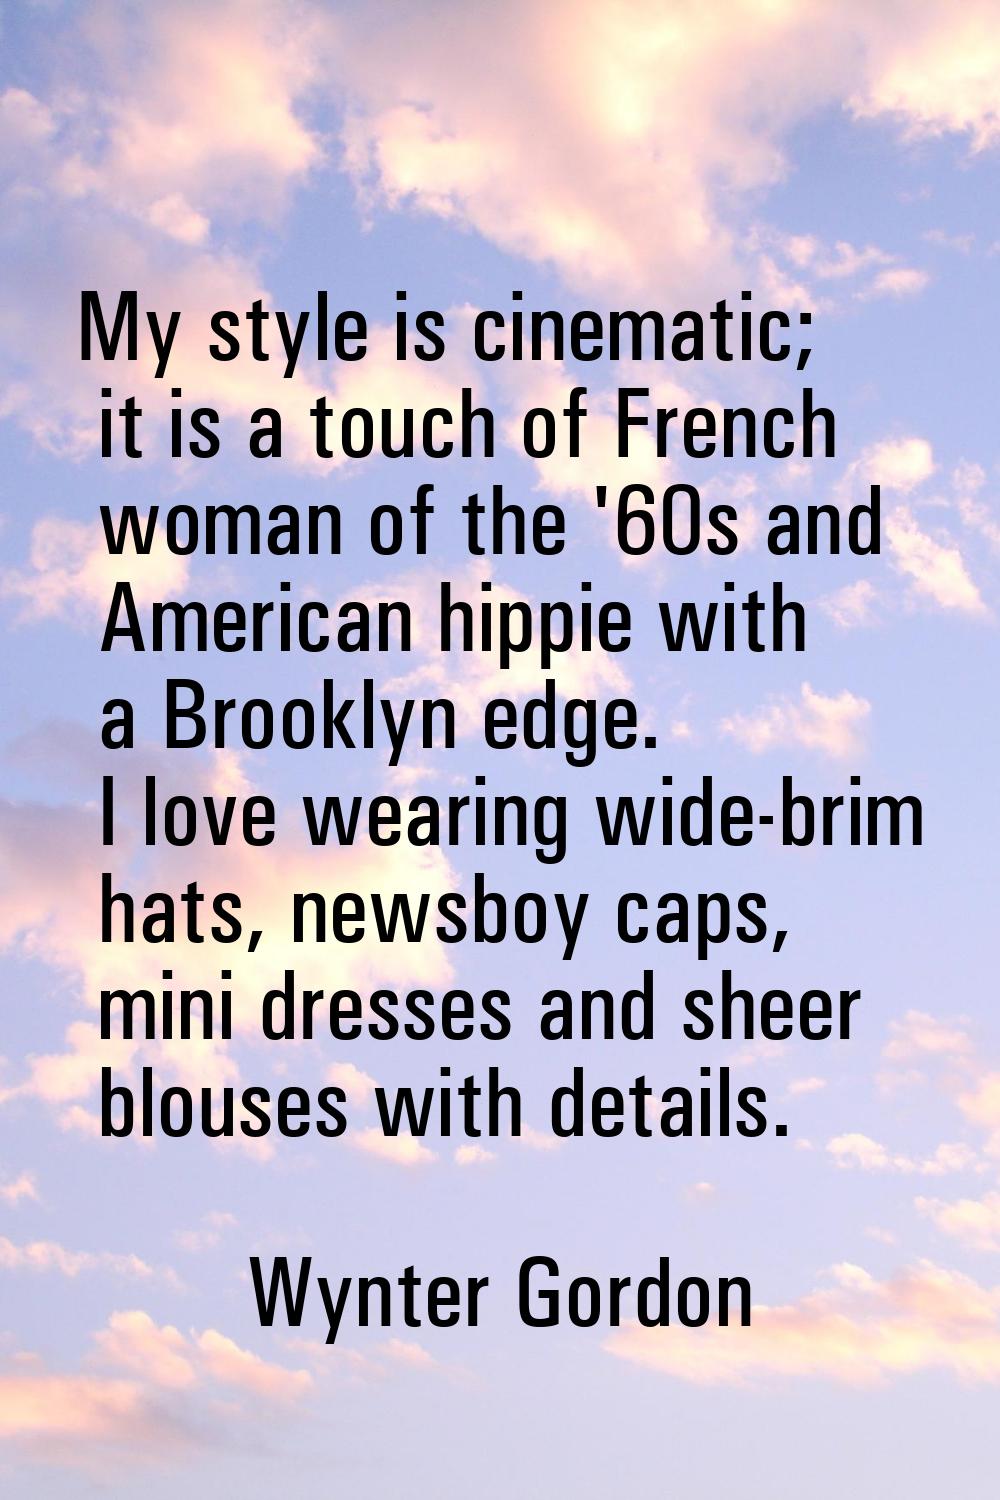 My style is cinematic; it is a touch of French woman of the '60s and American hippie with a Brookly